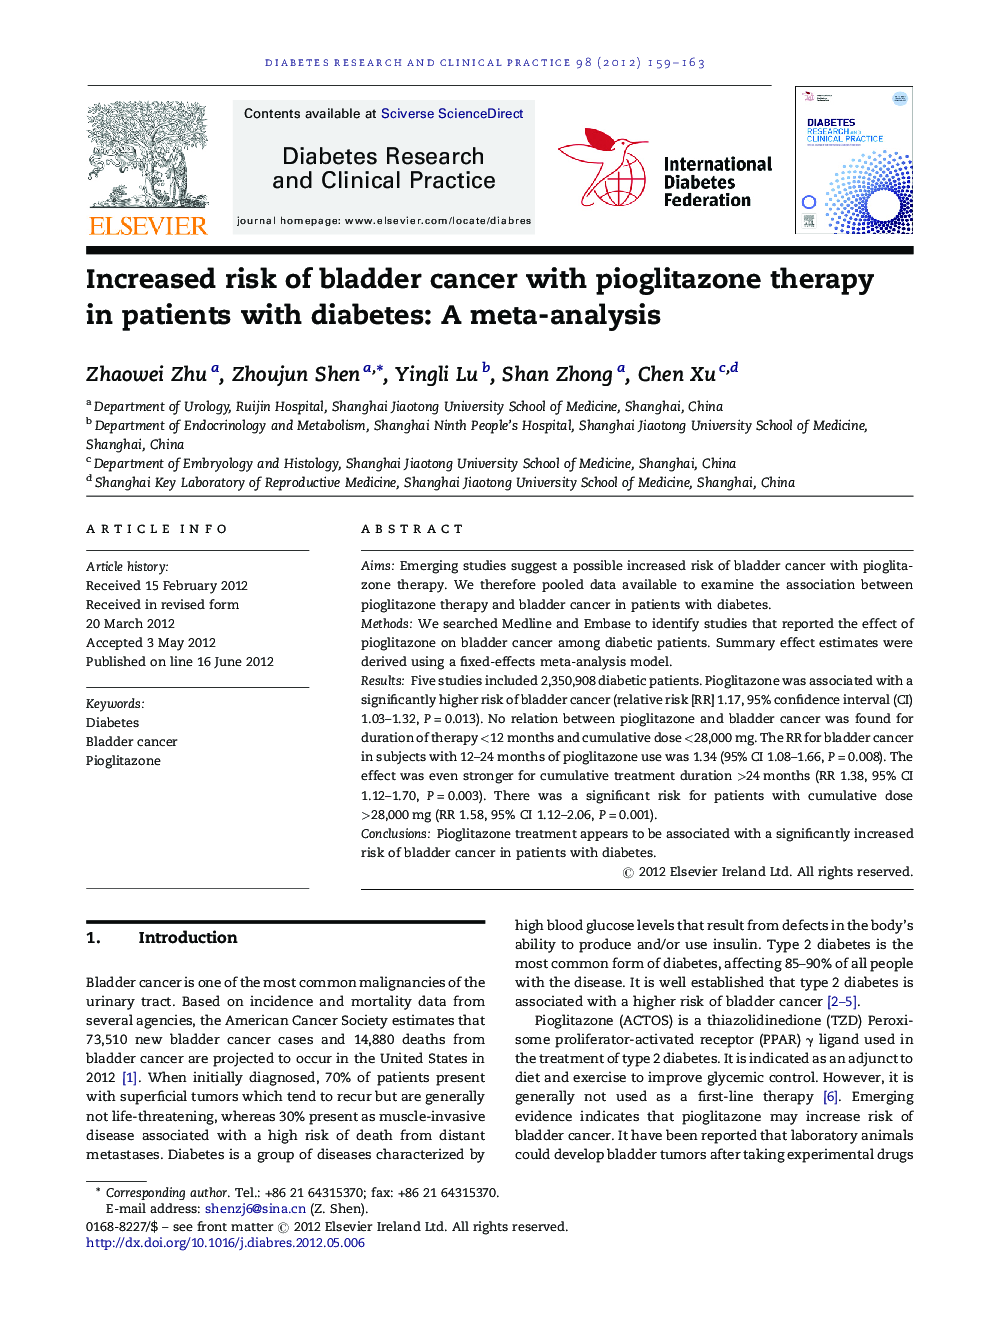 Increased risk of bladder cancer with pioglitazone therapy in patients with diabetes: A meta-analysis